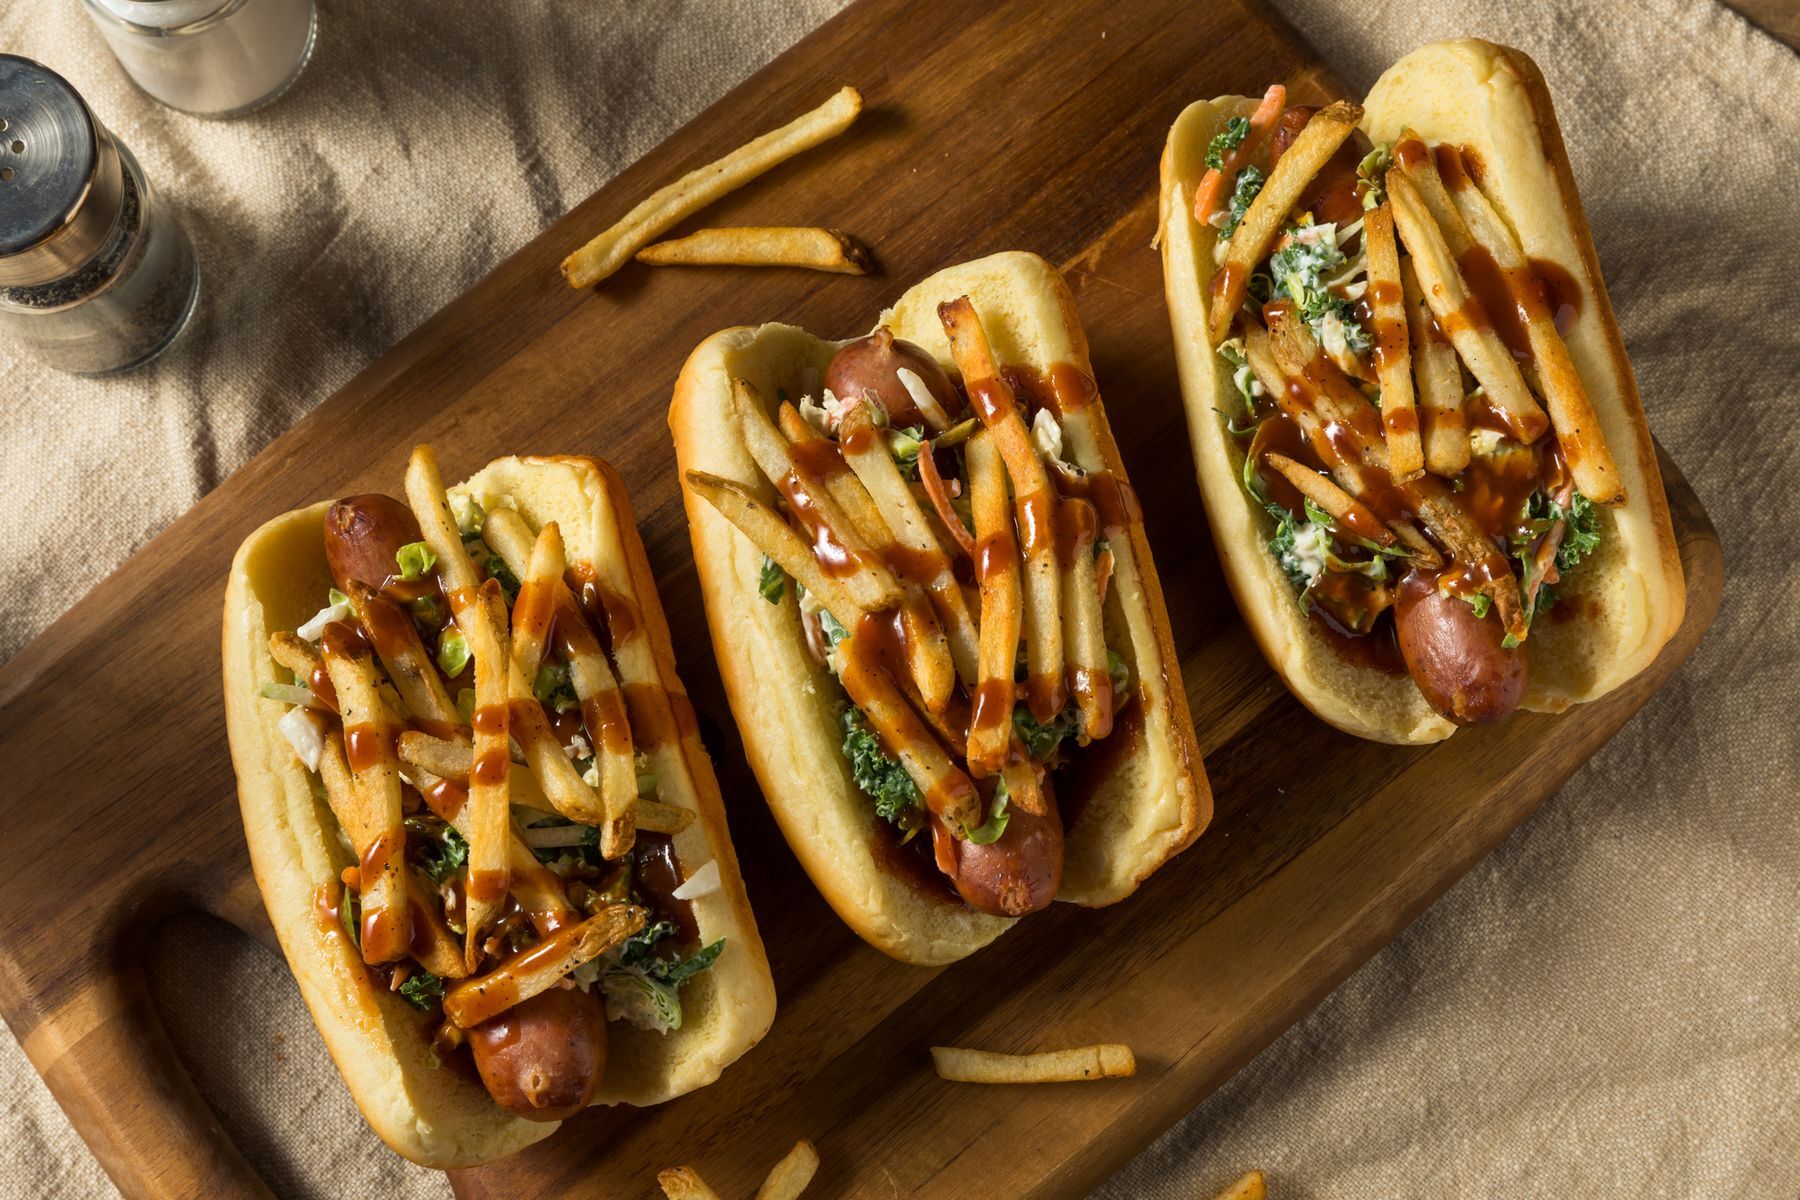 <p>Instead of ordering fries on the side, why not simply put them <em>in</em> your hot dog? This Belgian specialty is also known as a “<a href="https://www.ricardocuisine.com/en/recipes/7120-merguez-hot-dogs">mitraillette</a>” (machine gun).</p>